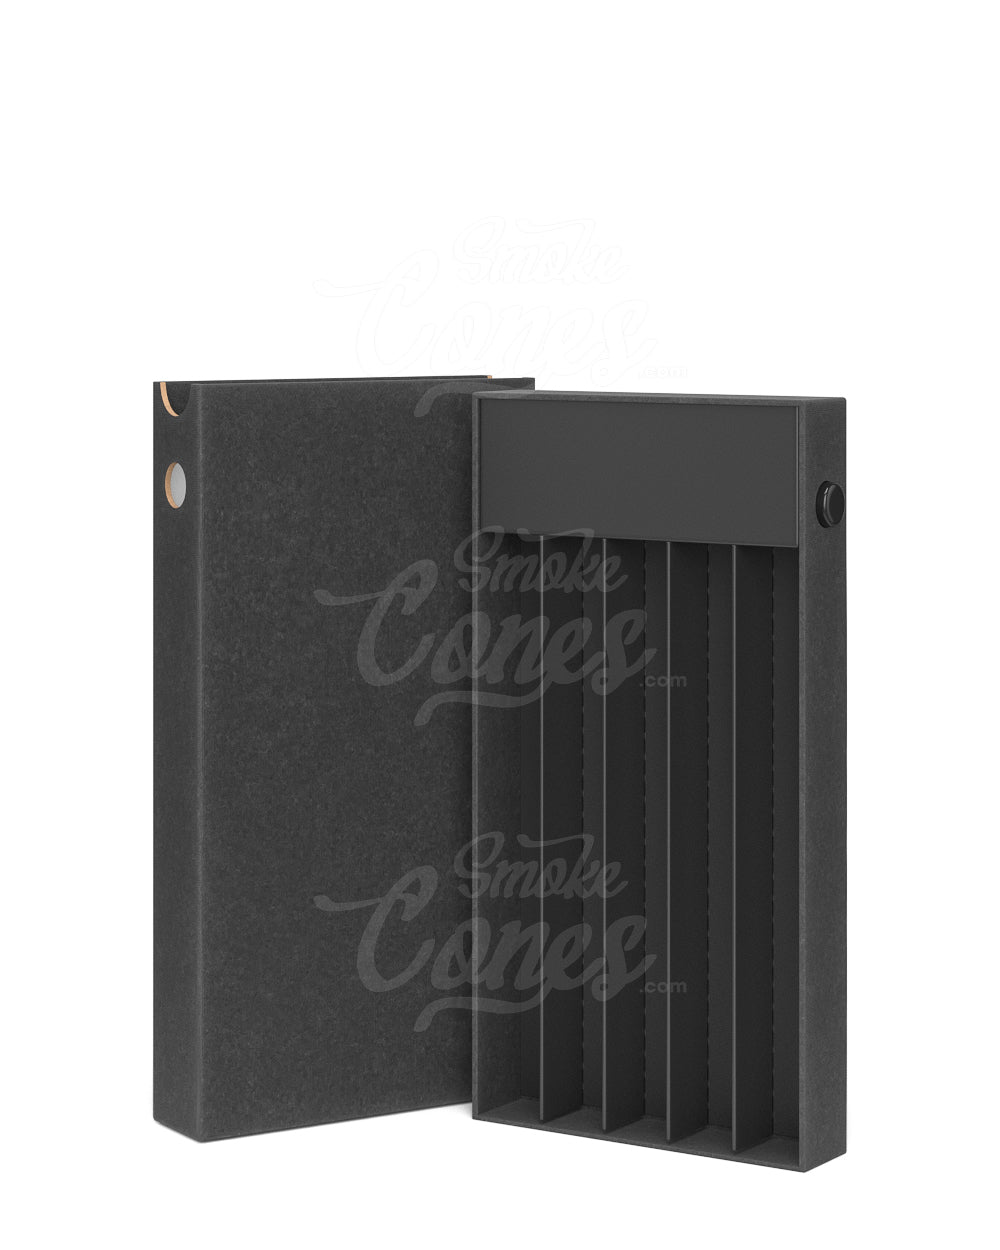 145mm Slim Discreet Recyclable Black Cardboard CR Joint Case